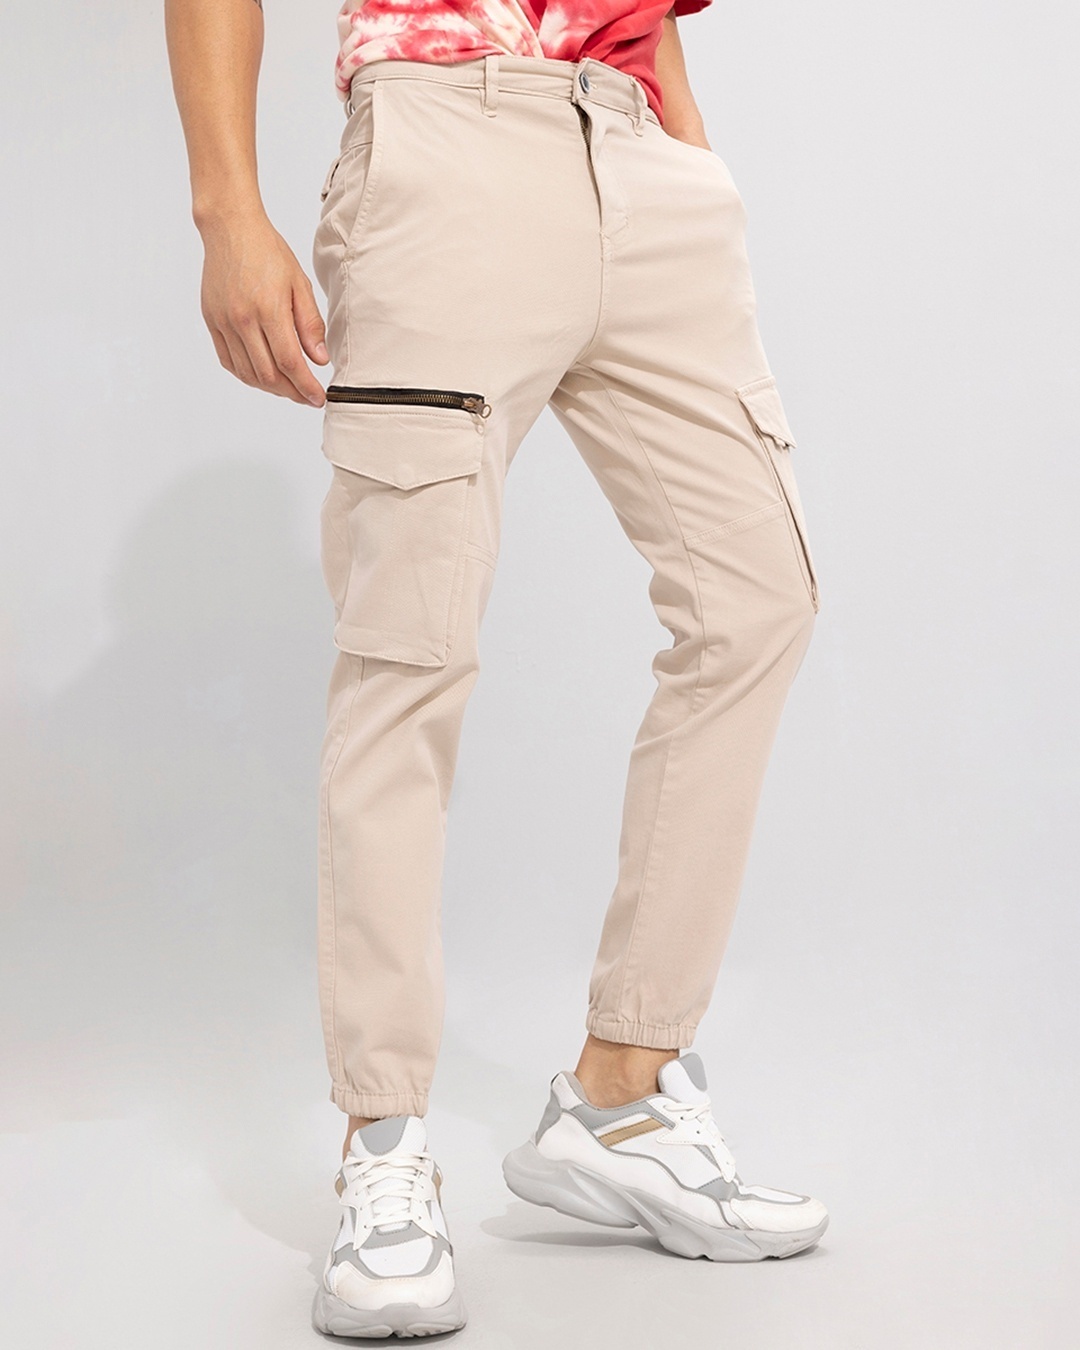 Buy Mast  Harbour Khaki Skinny Differential Length Trousers  Trousers for  Men 1274462  Myntra